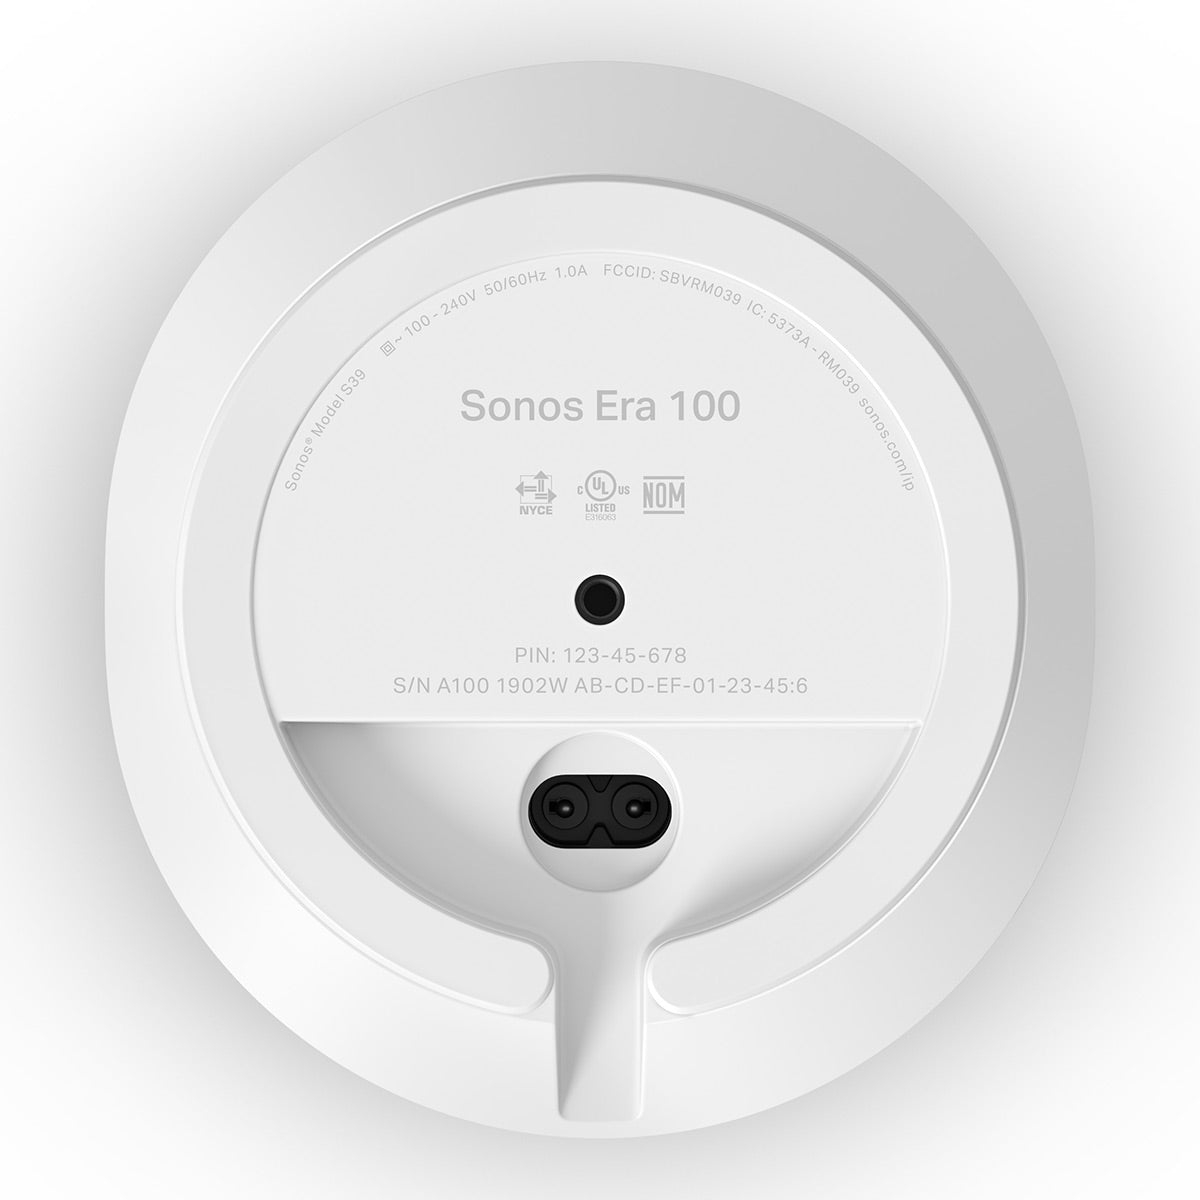 Sonos Era 100 Voice-Controlled Wireless Bluetooth Smart Speaker with Split Combo Cable Adapter with Ethernet and 3.5 mm Jack (White)